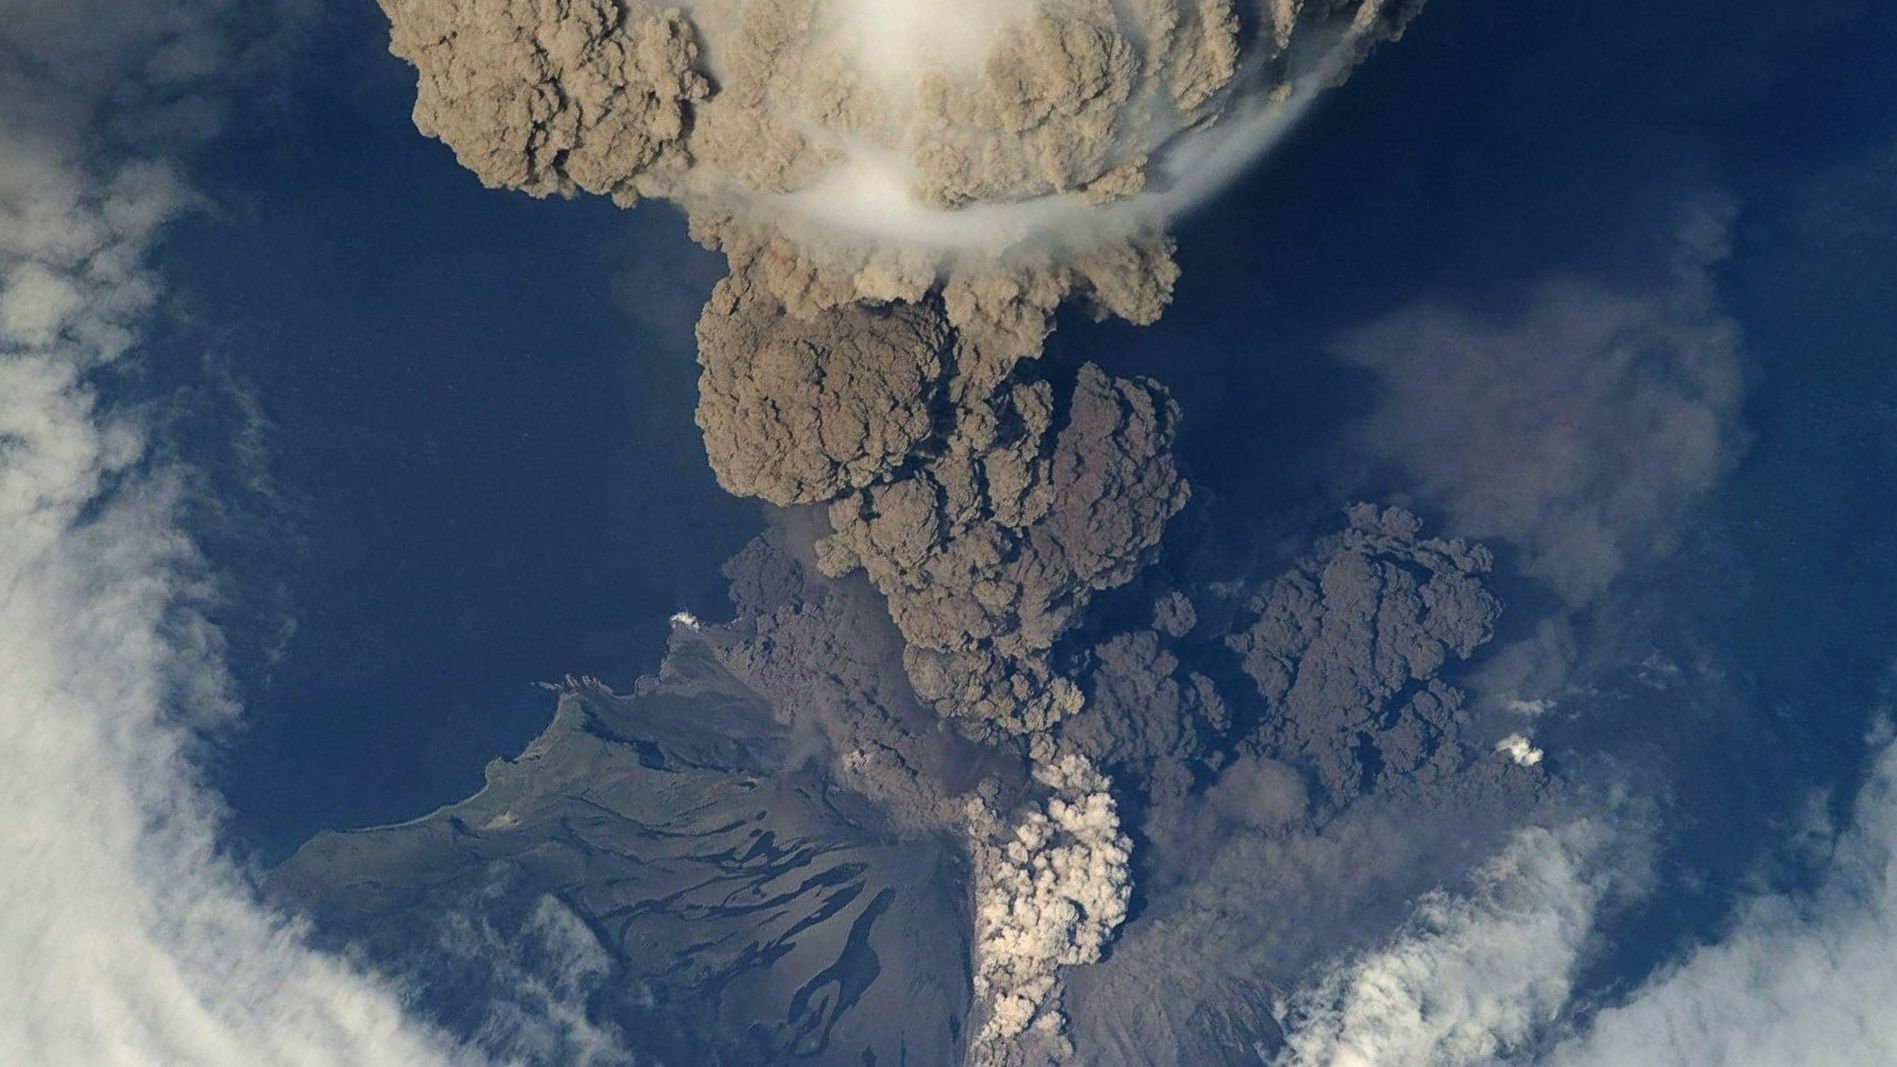 Ashes of the Karymsky volcano covered the south of Kamchatka